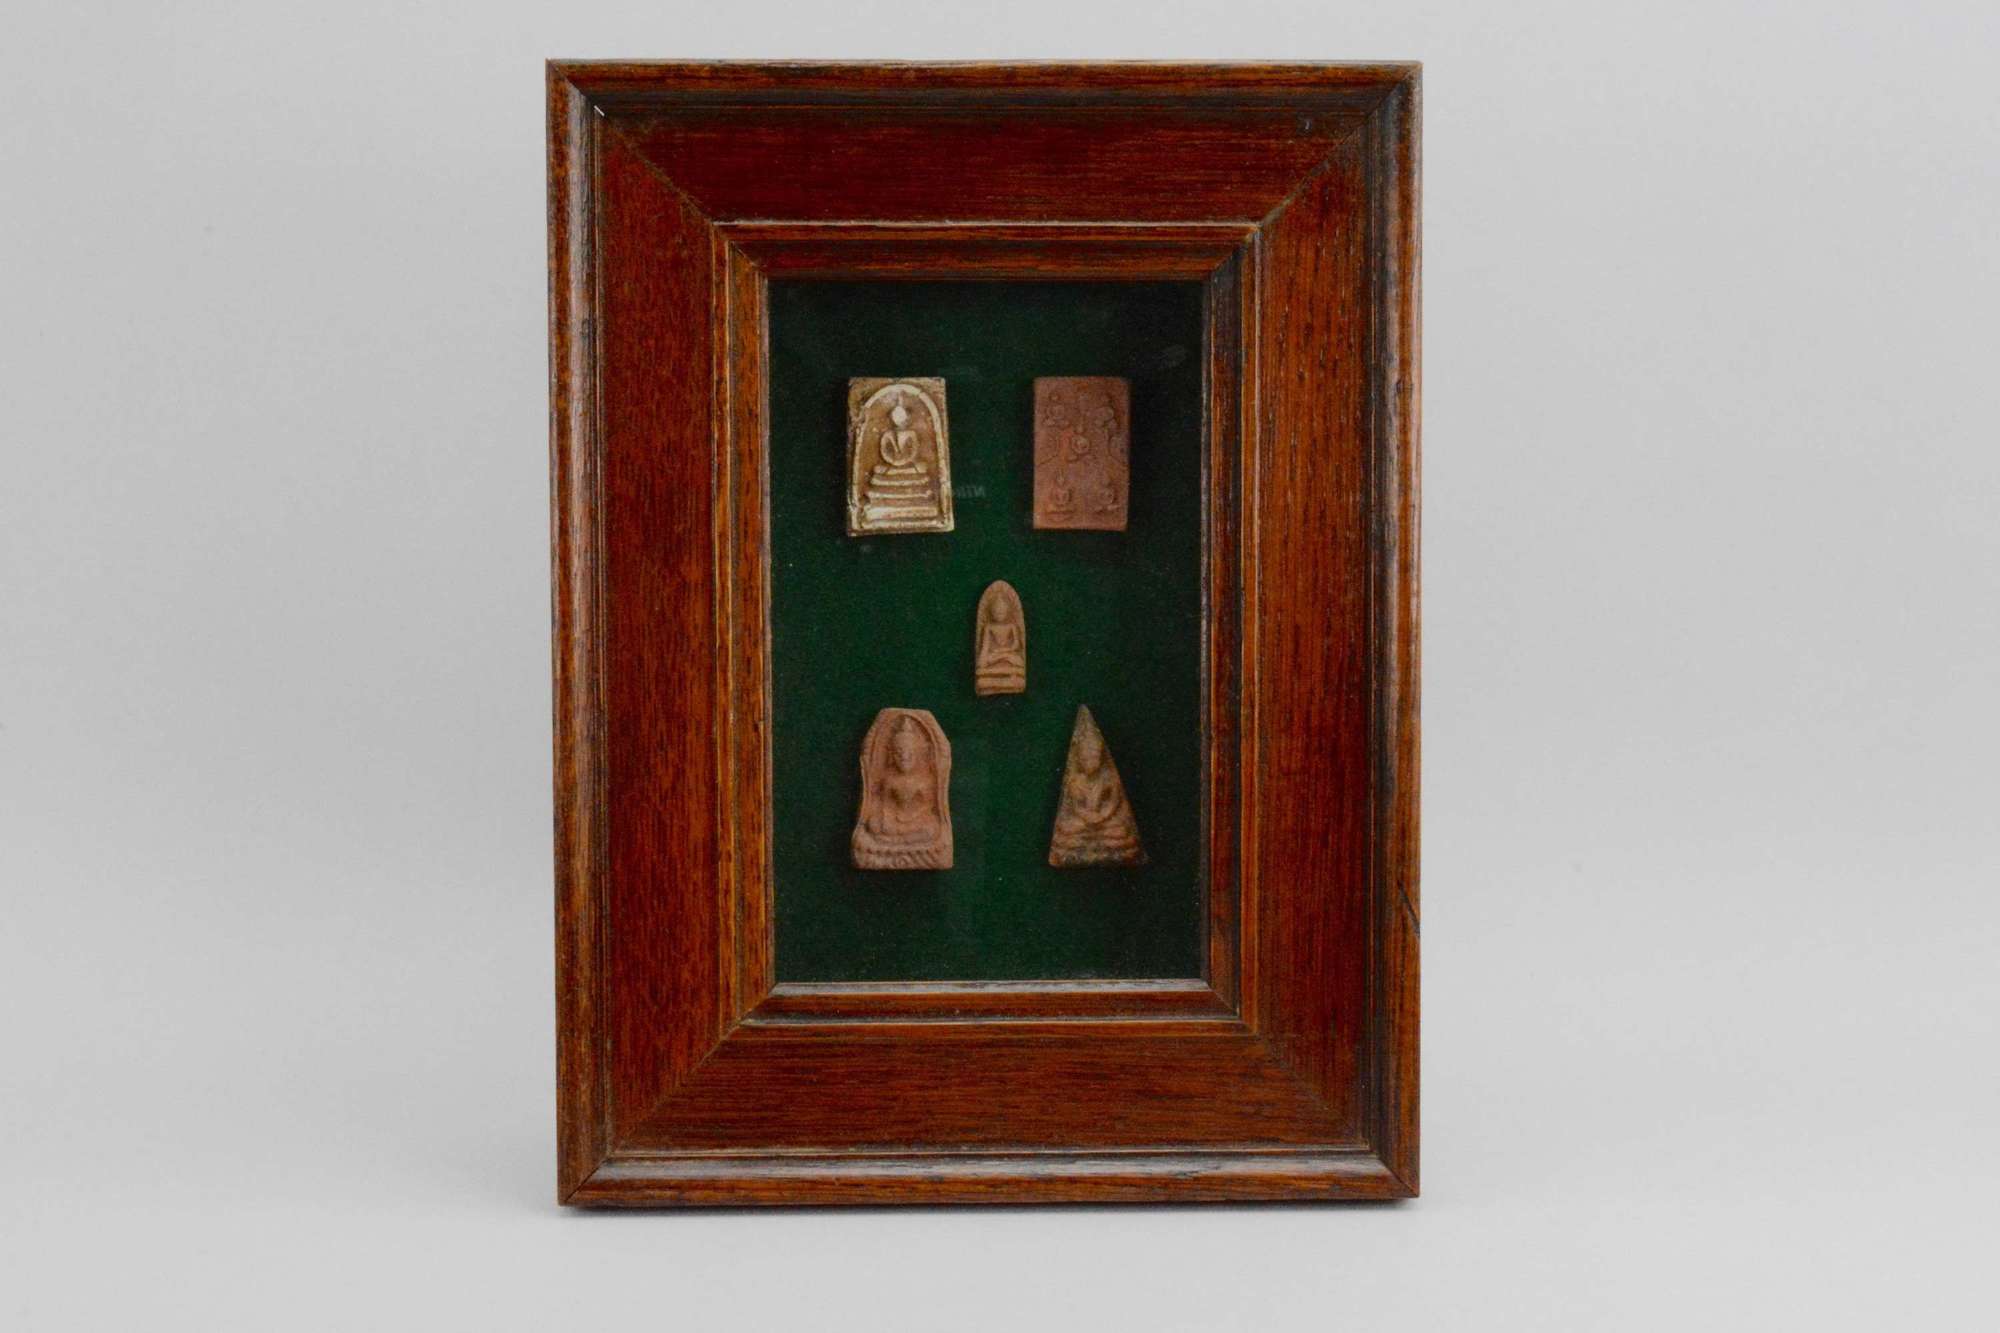 Five antique Thai pottery Buddha amulets mounted in an oak box frame